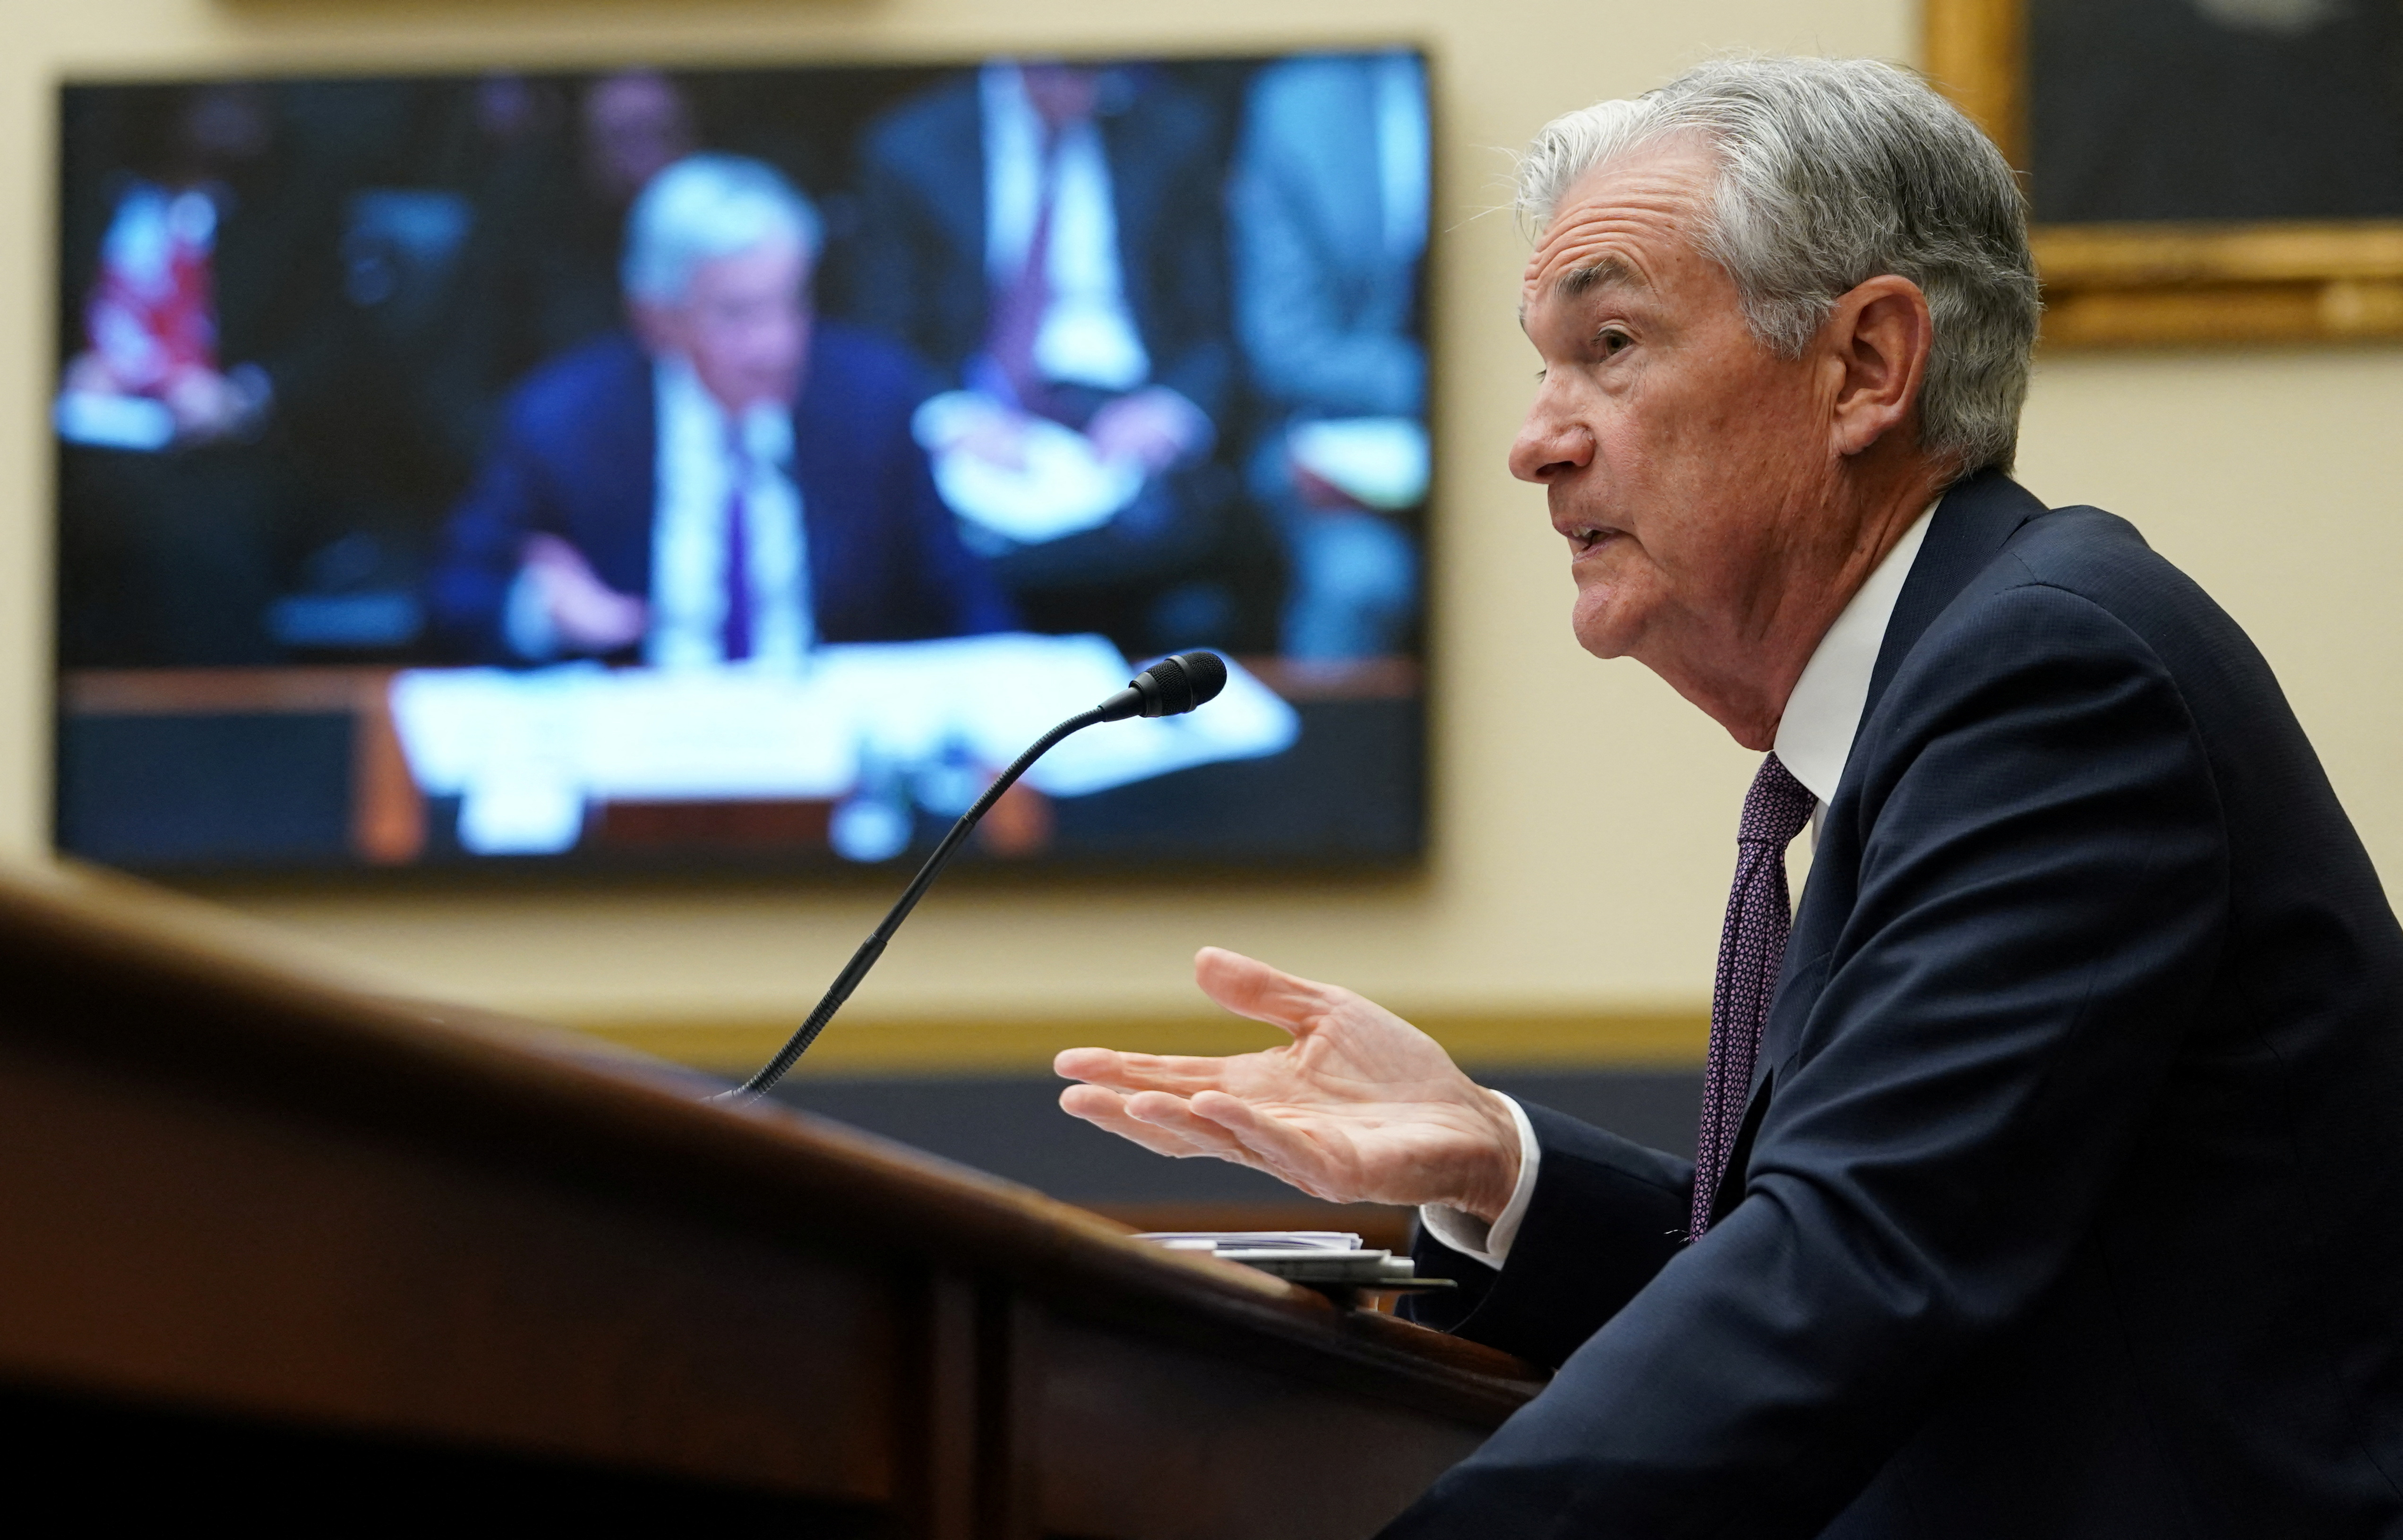 Federal Reserve Chair Jerome Powell testifies at a hearing on Capitol Hill in Washington